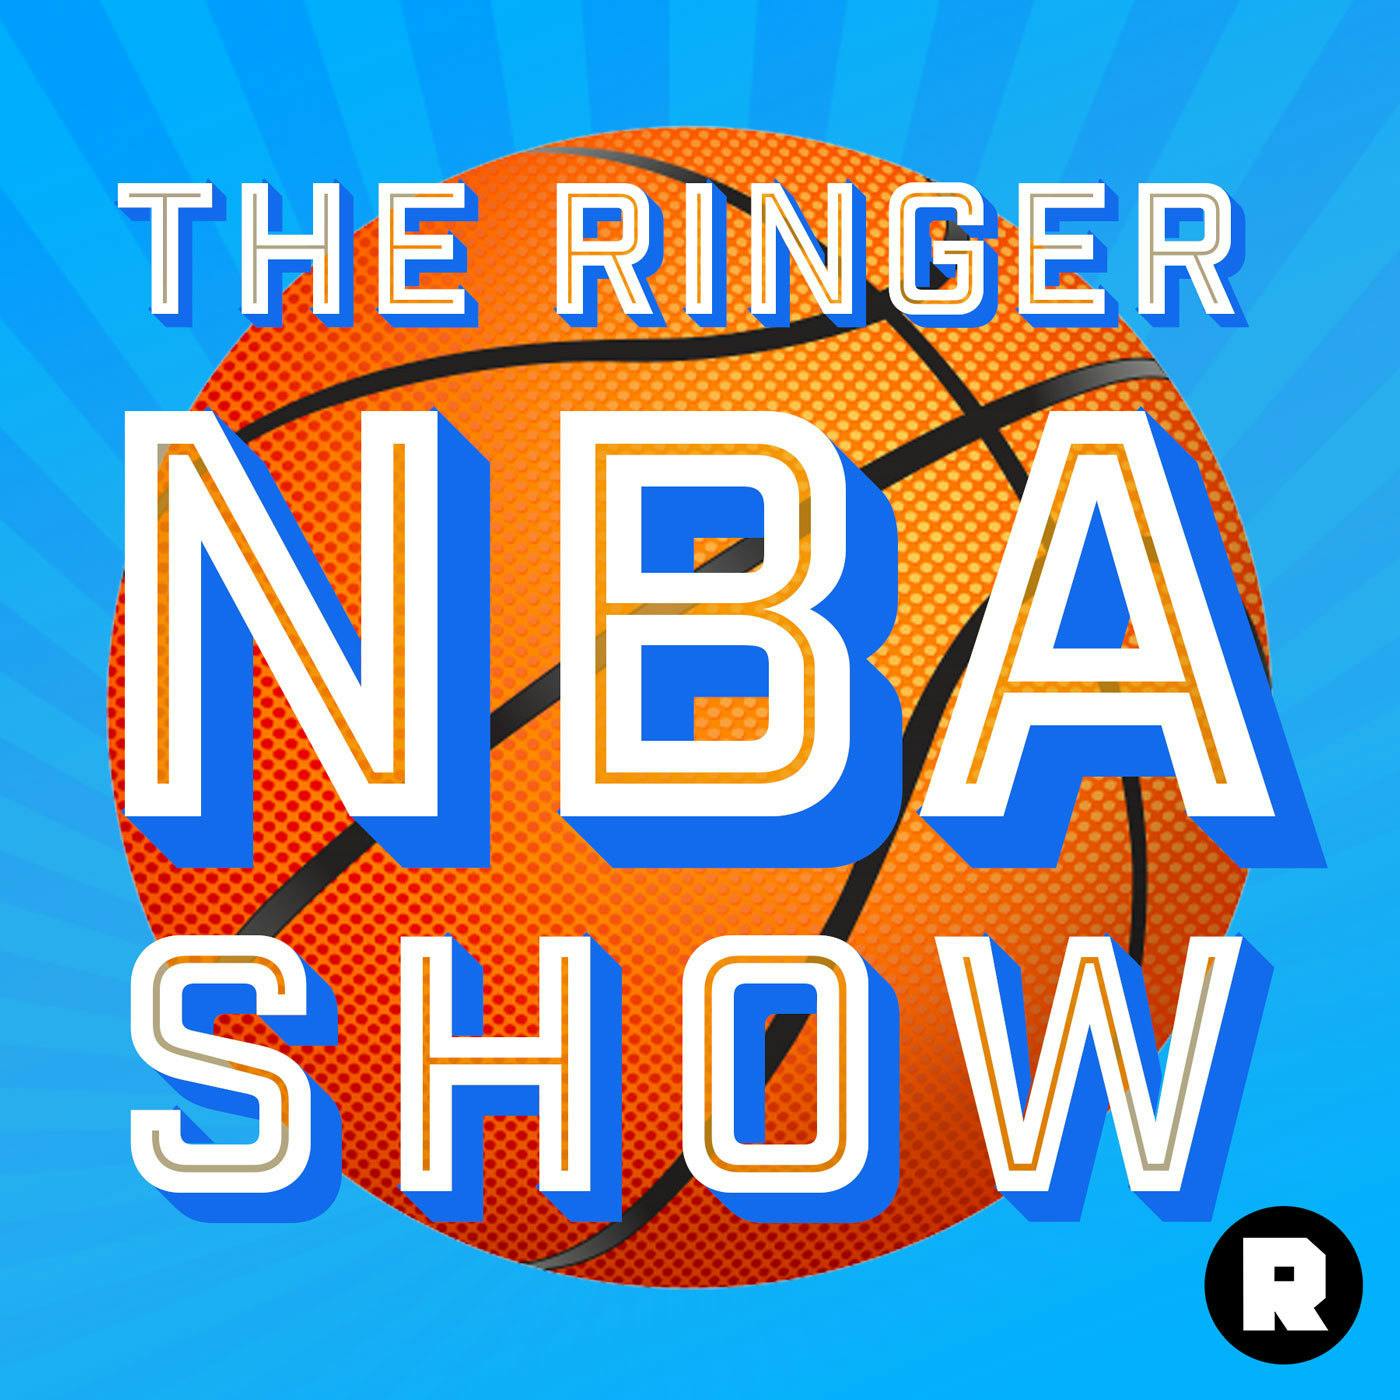 Villanova Wildcats in the NBA, Shuffling Playoff Seeds, and Predicting the Favorites | The Ringer NBA Show (Ep. 241)